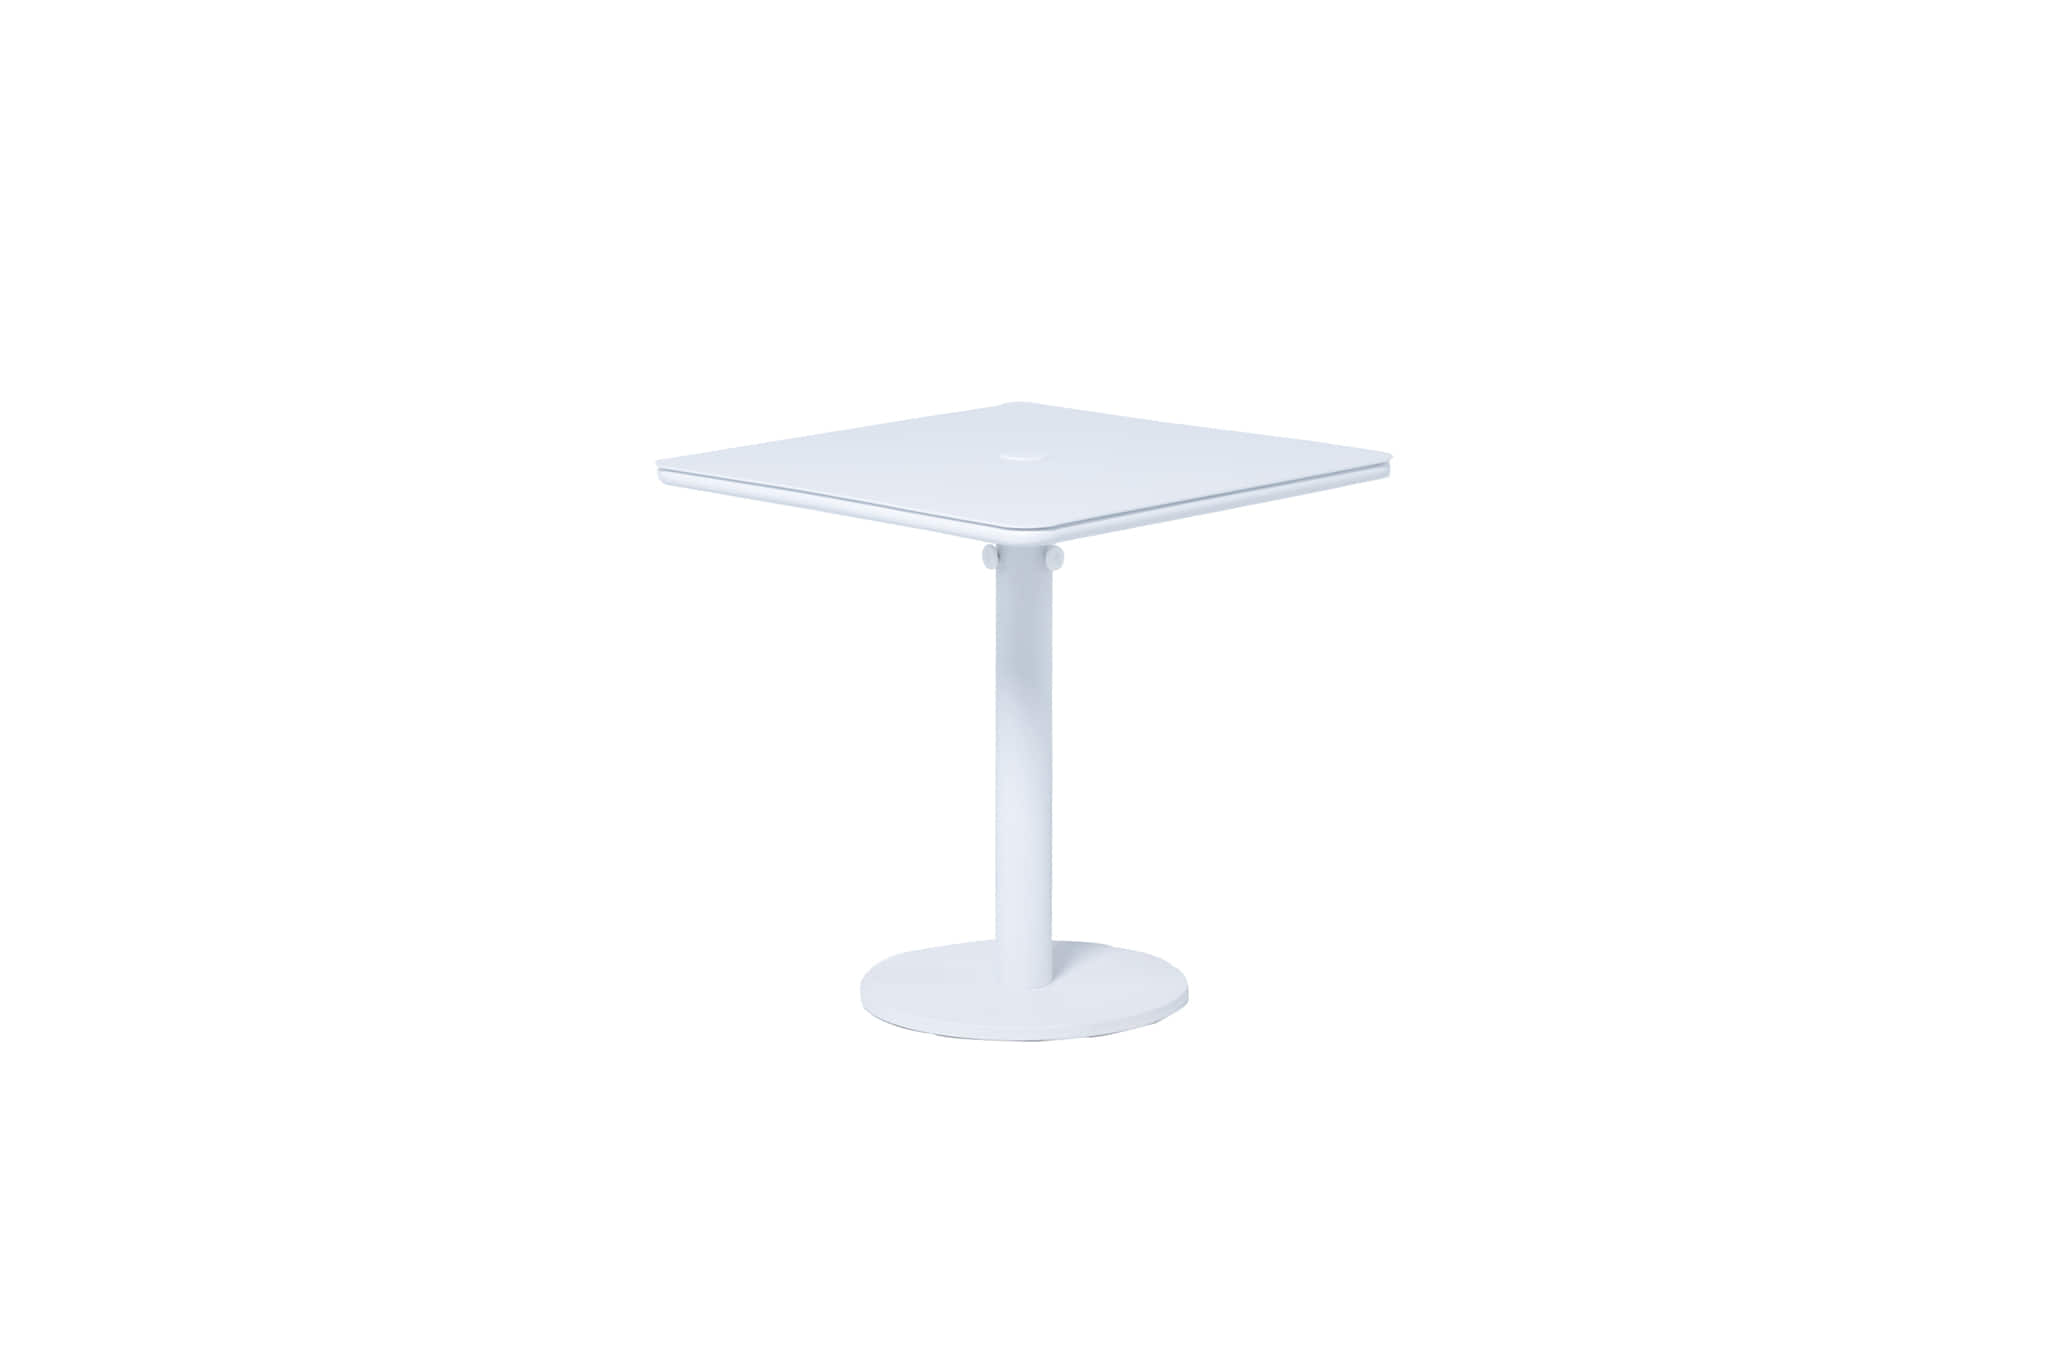 Docent Net_DocentNet Square Table_White